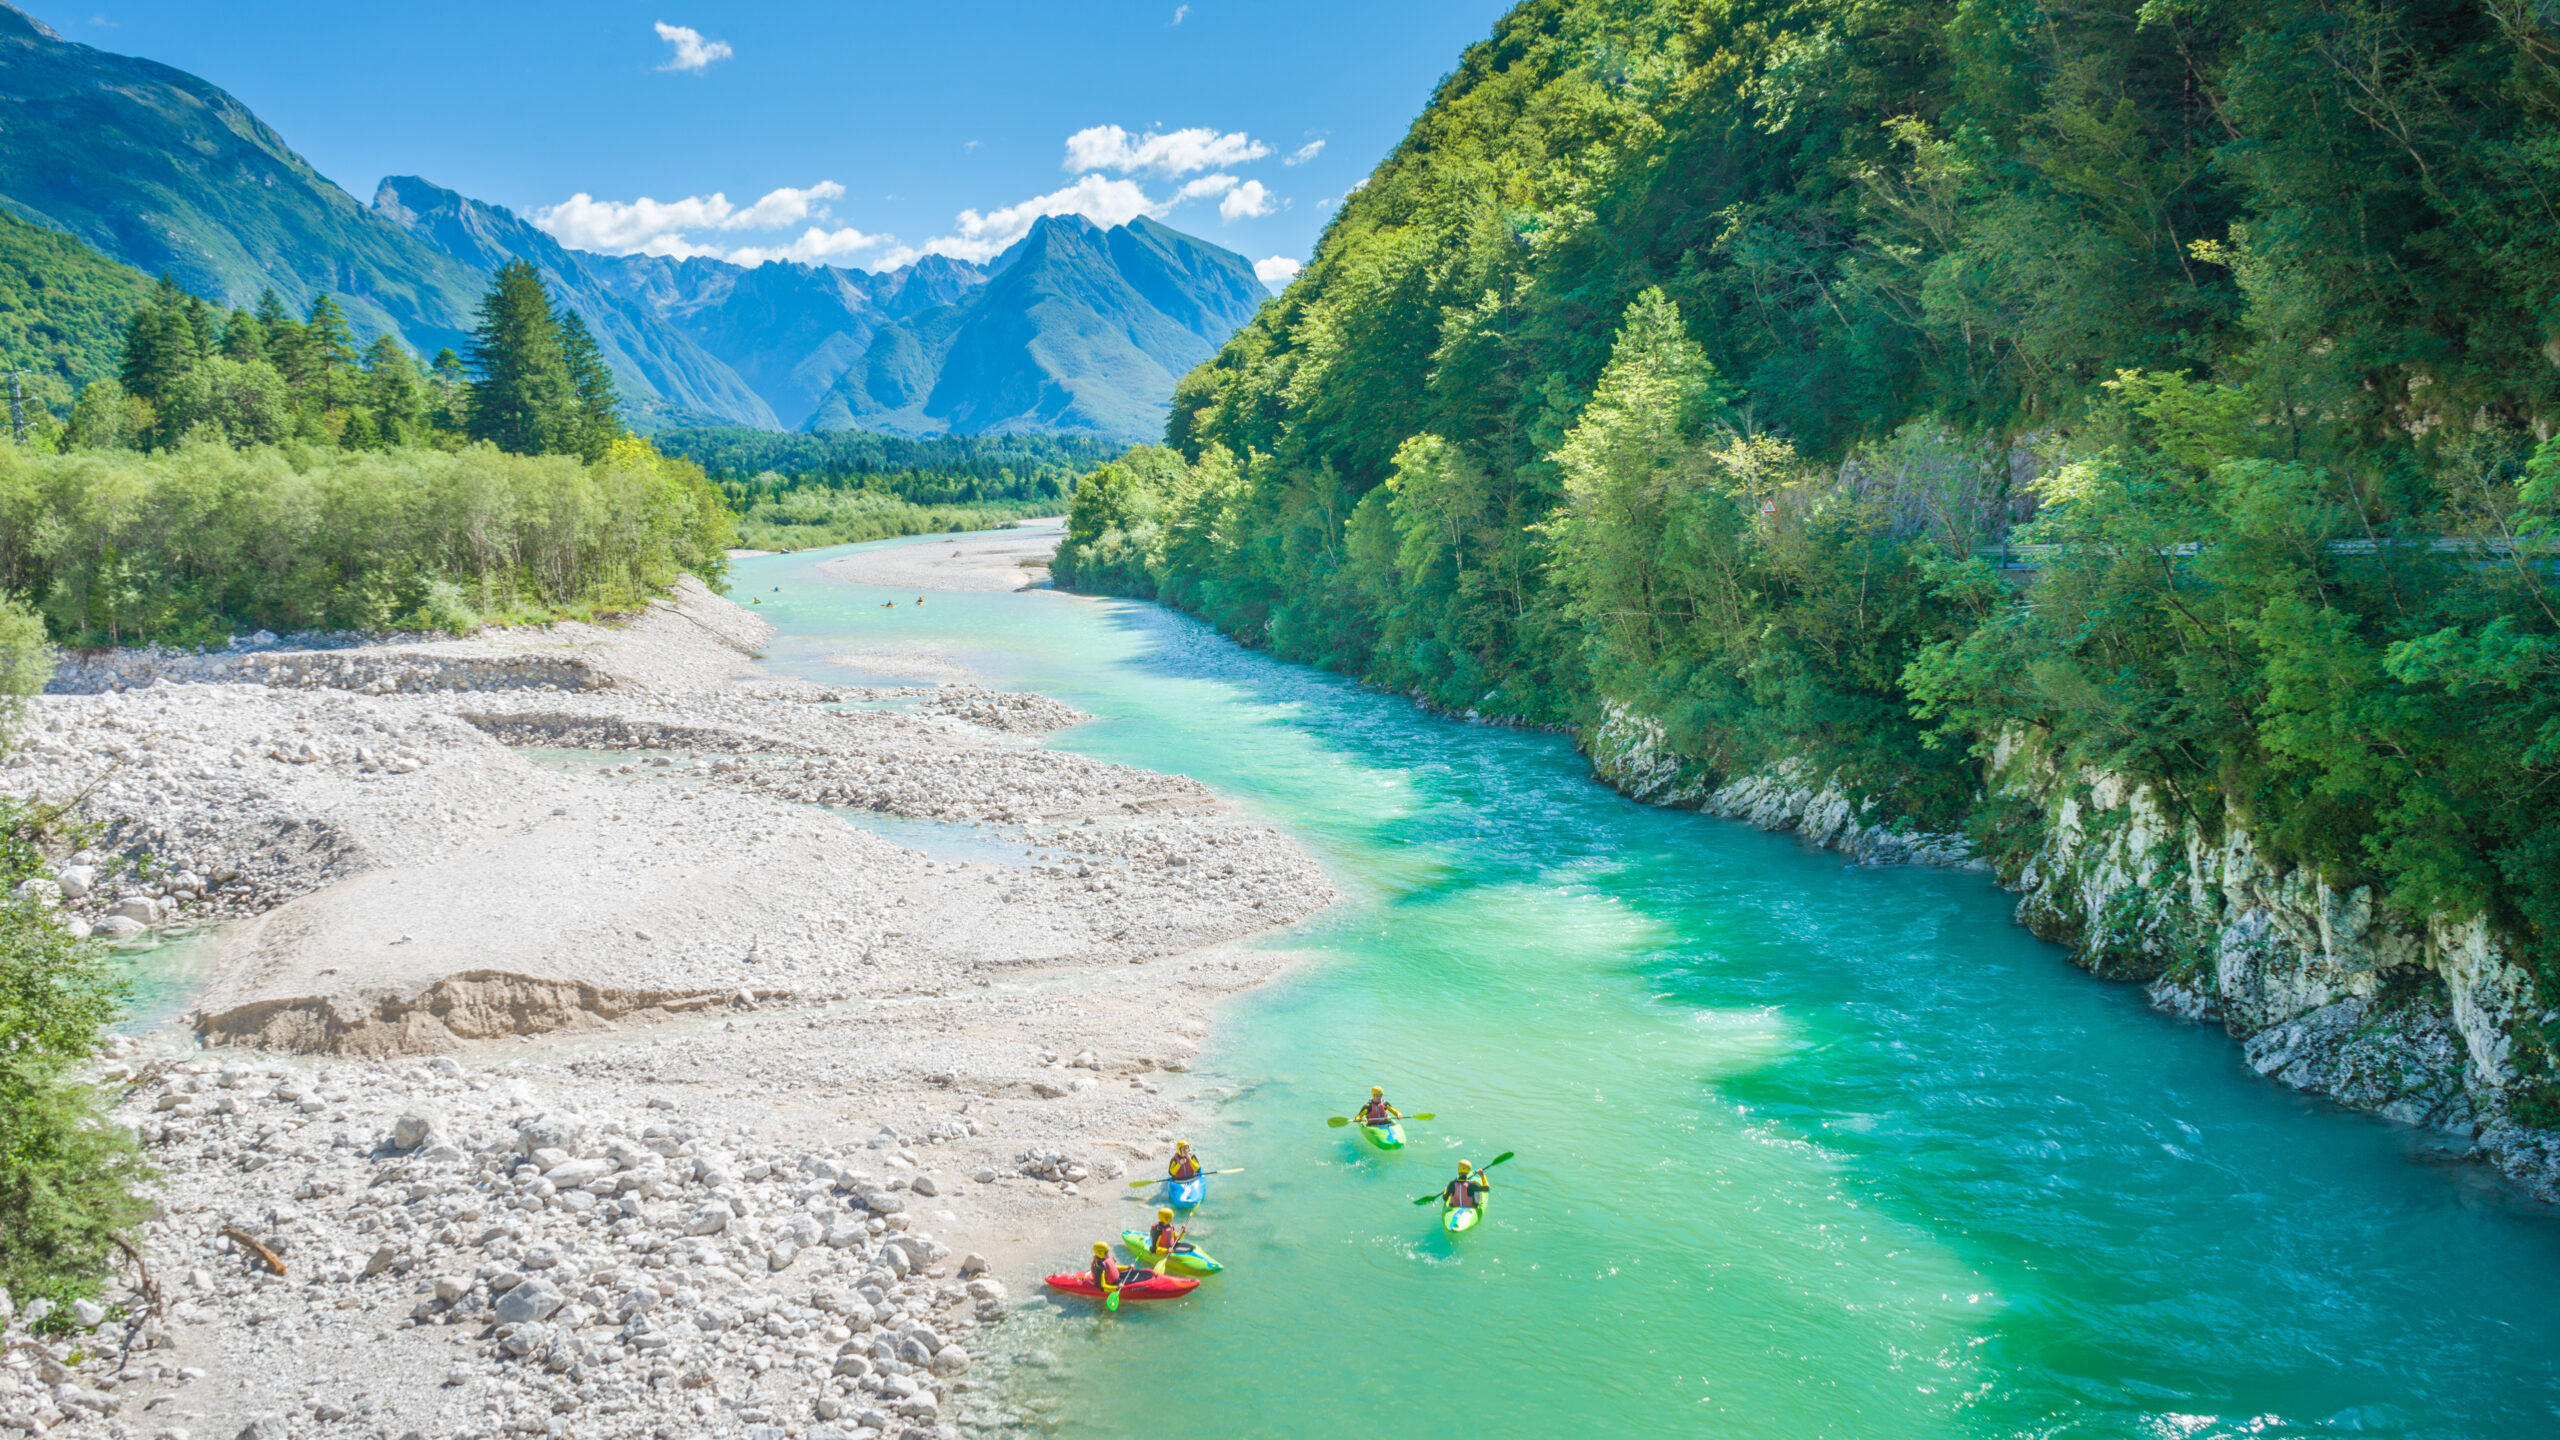 Watersport in river with mountains in the background